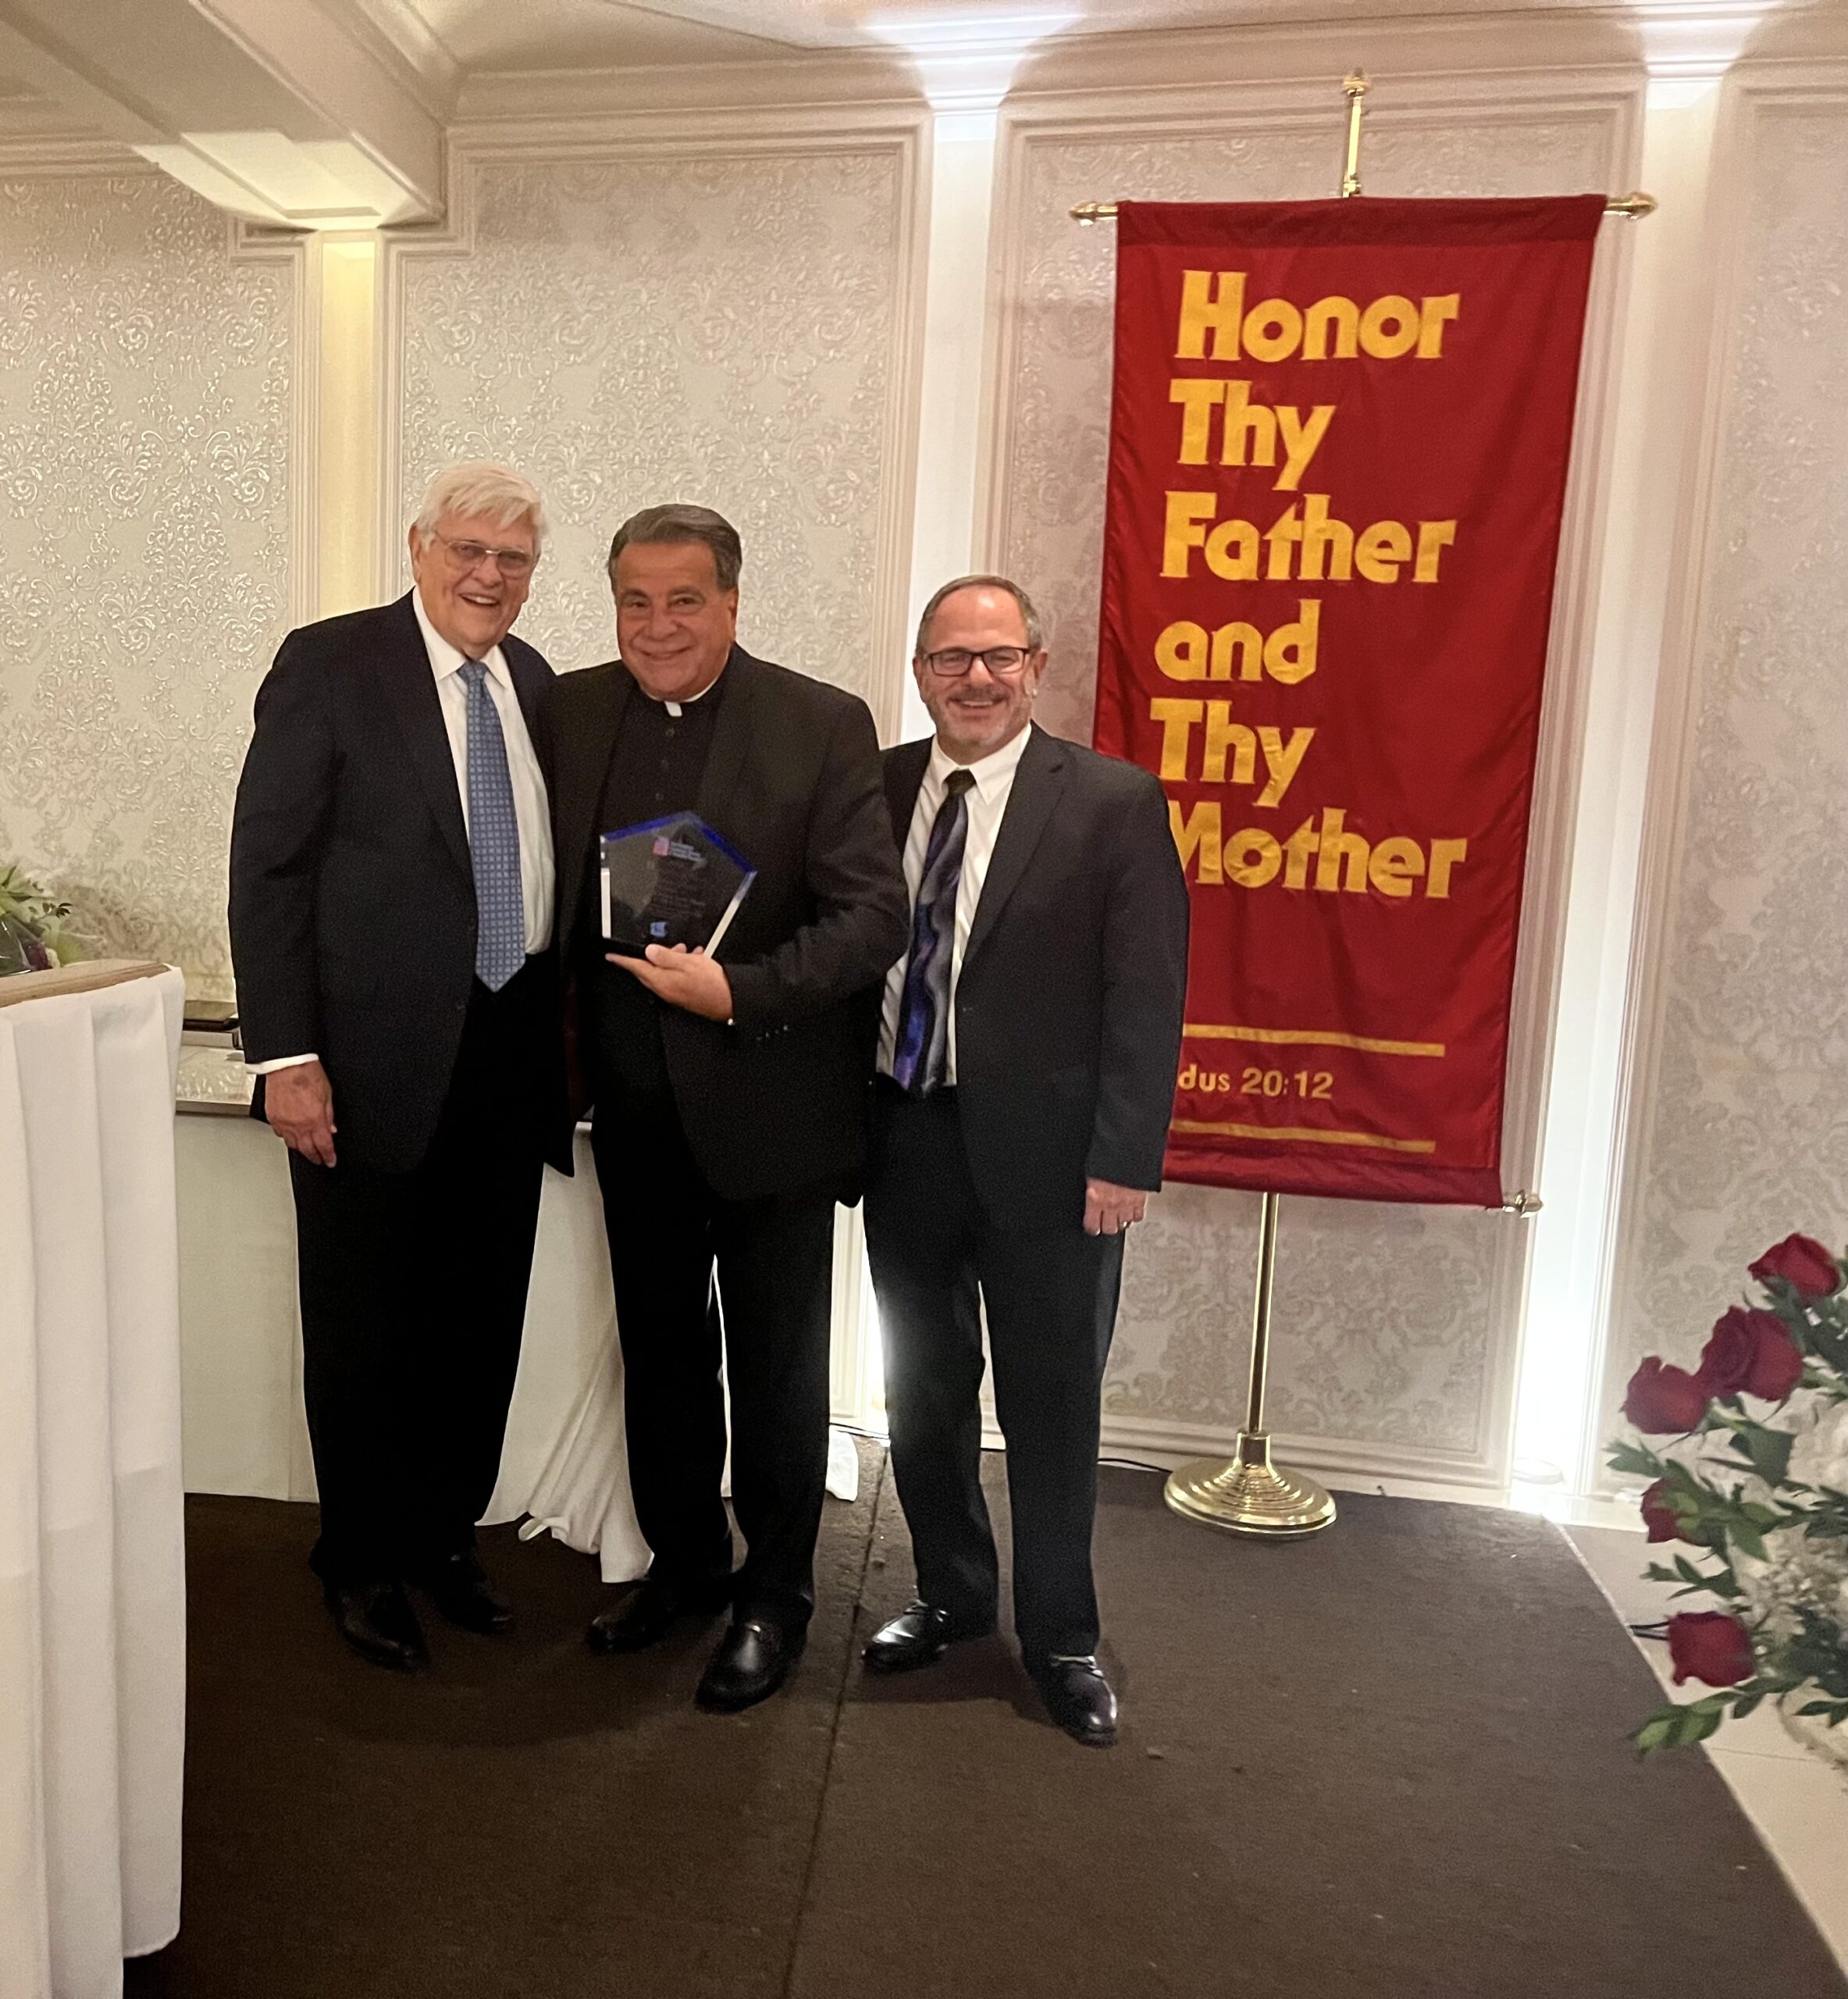 From left: George A. Jensen, chairman of the board; Rev. Monsignor David Cassato, vicar for Catholic Schools; Anthony J. Restaino, executive director.